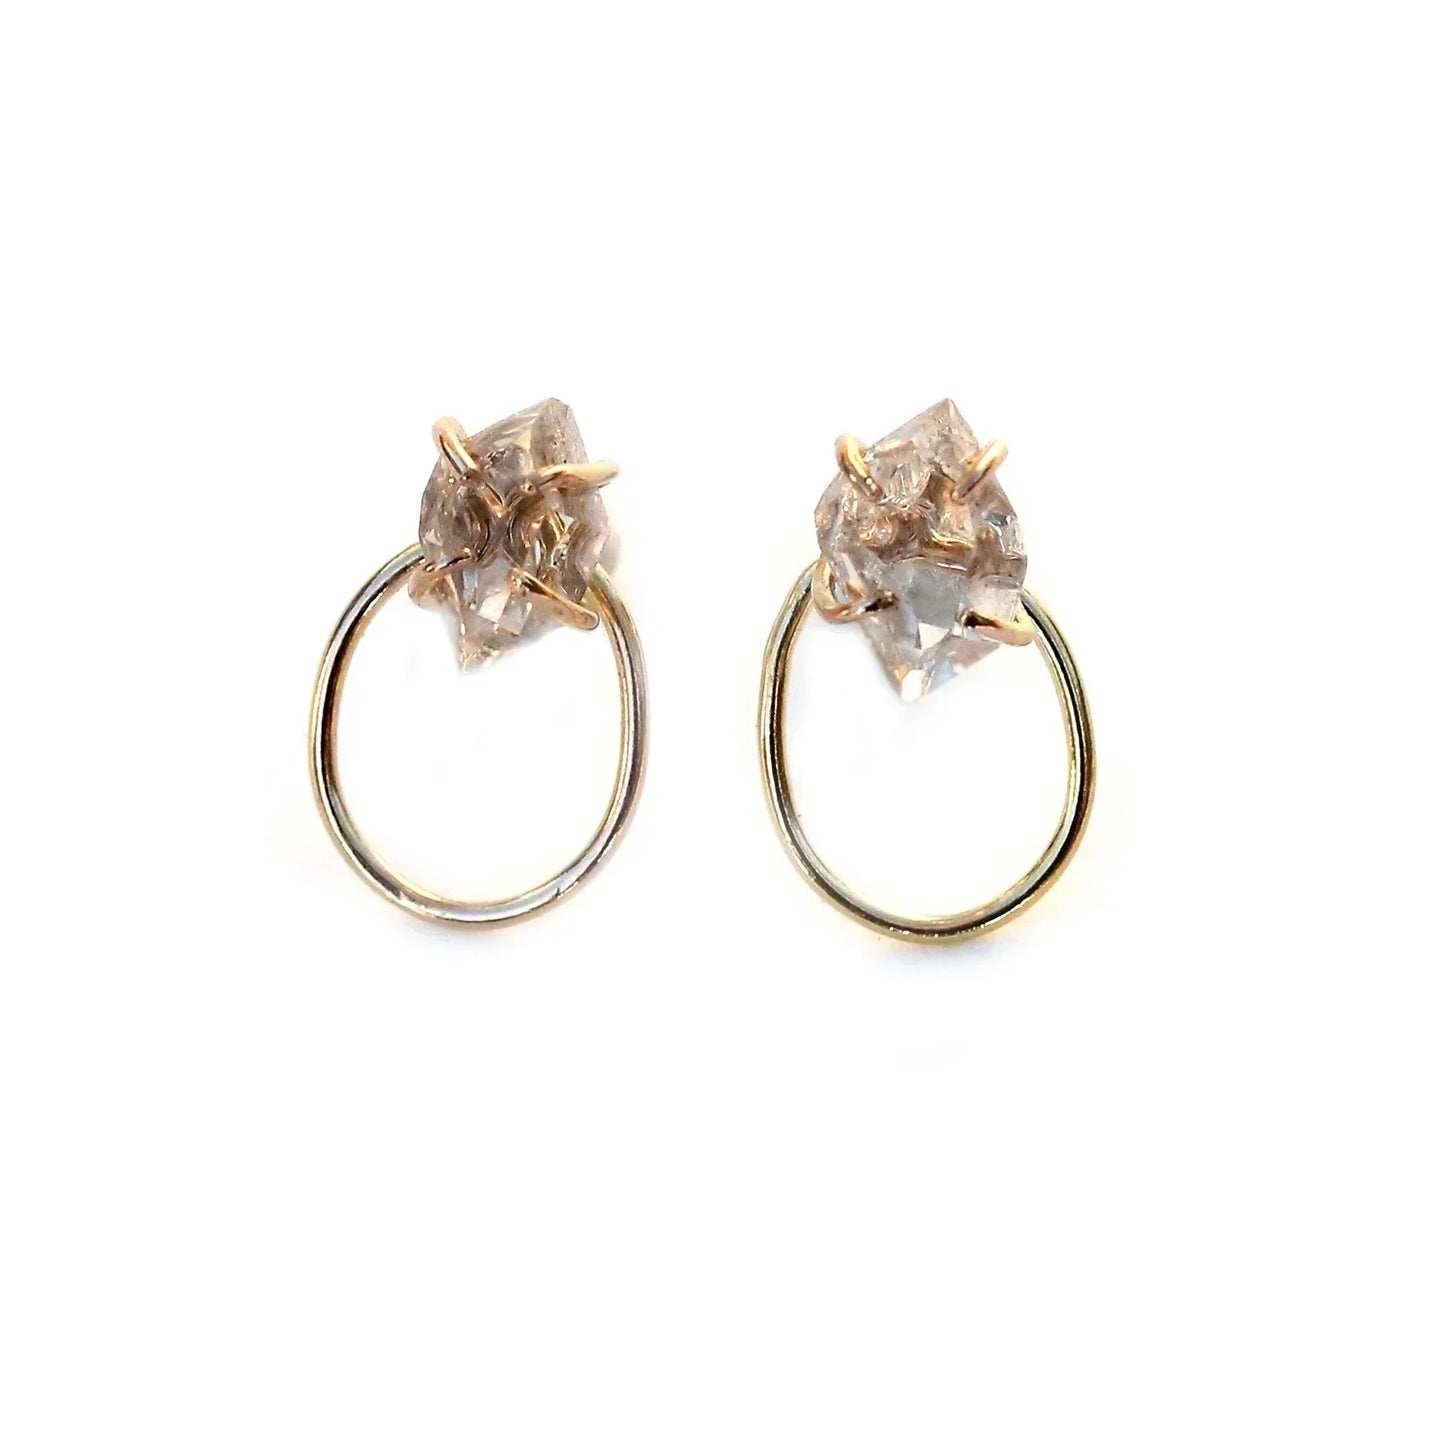 Herkimer Diamond Loop Studs 14k Gold filled by Alana Douvros - Premium Earrings at Bling Box - Just $165 Shop now at Bling Box Alana Douvros, Earrings, Everyday, Featured, Statement